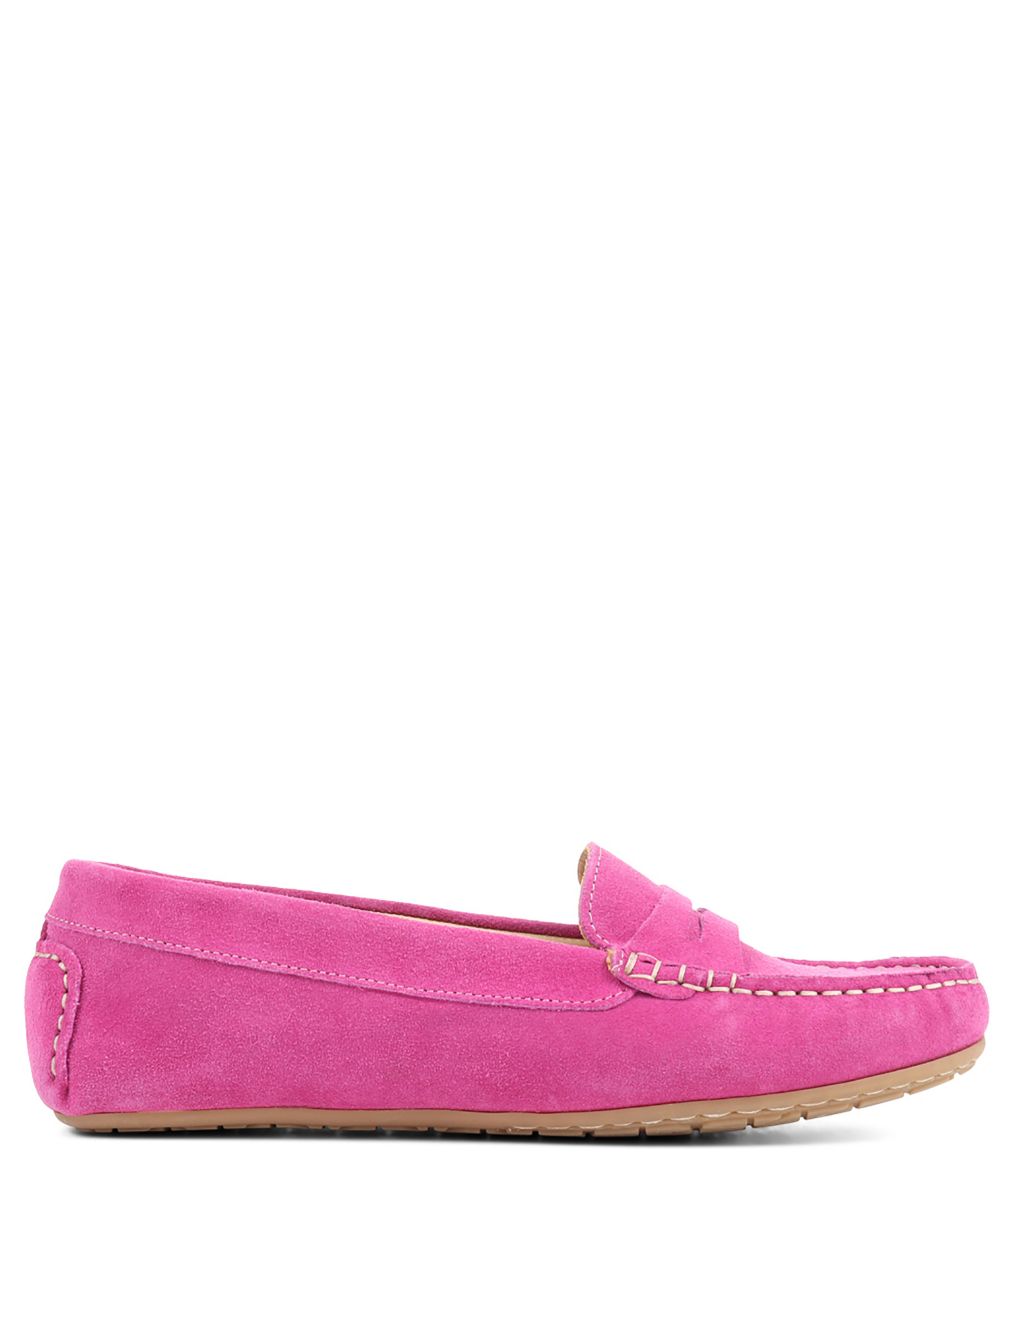 Suede Slip On Loafers image 2